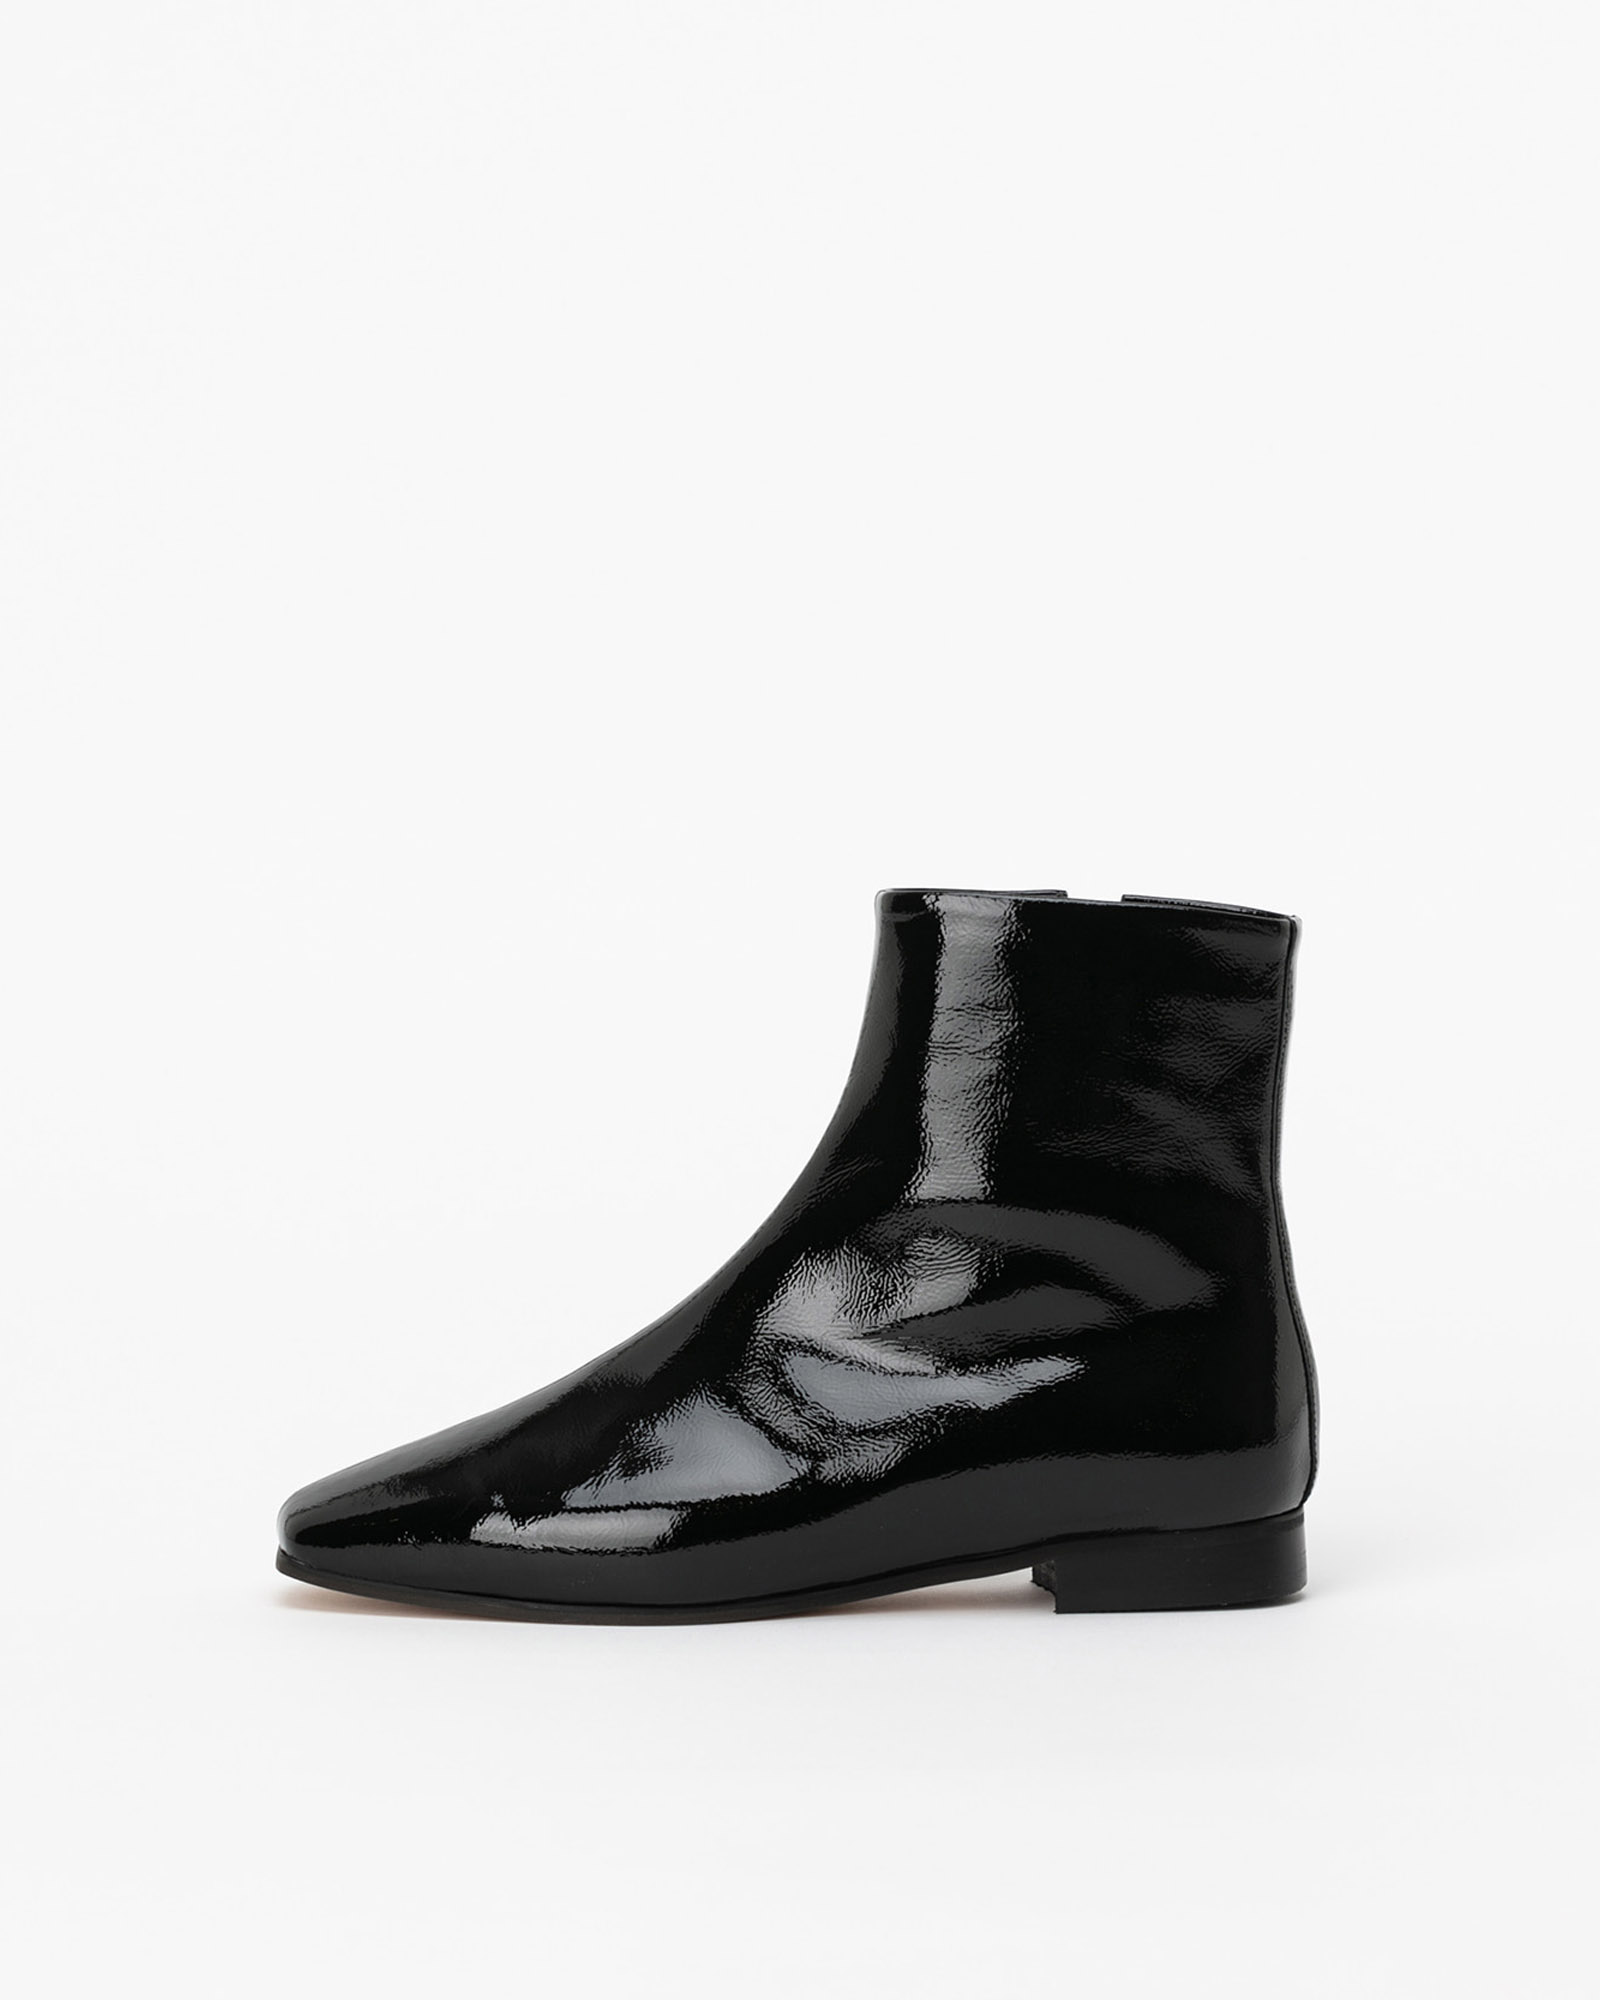 Diverti Flat Boots in Black Wrinkle Patent